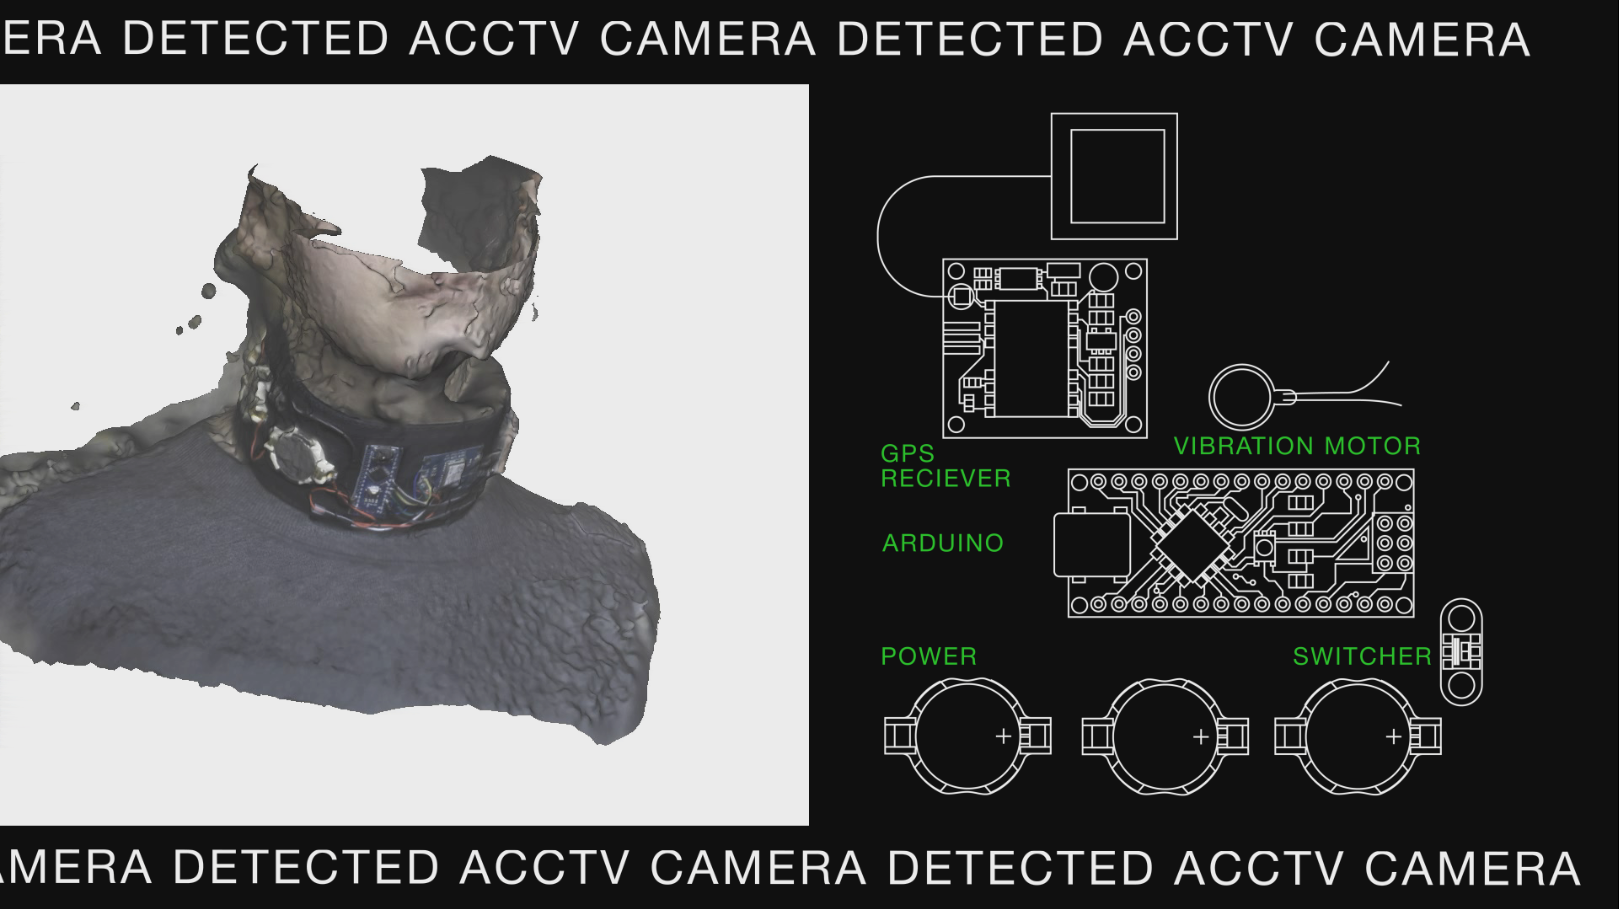 aCCTV, 2019. This work takes form of a wearable device that alerts the user of CCTVs around them, comparing the user’s location to the data on surveillance cameras from Moscow’s open website